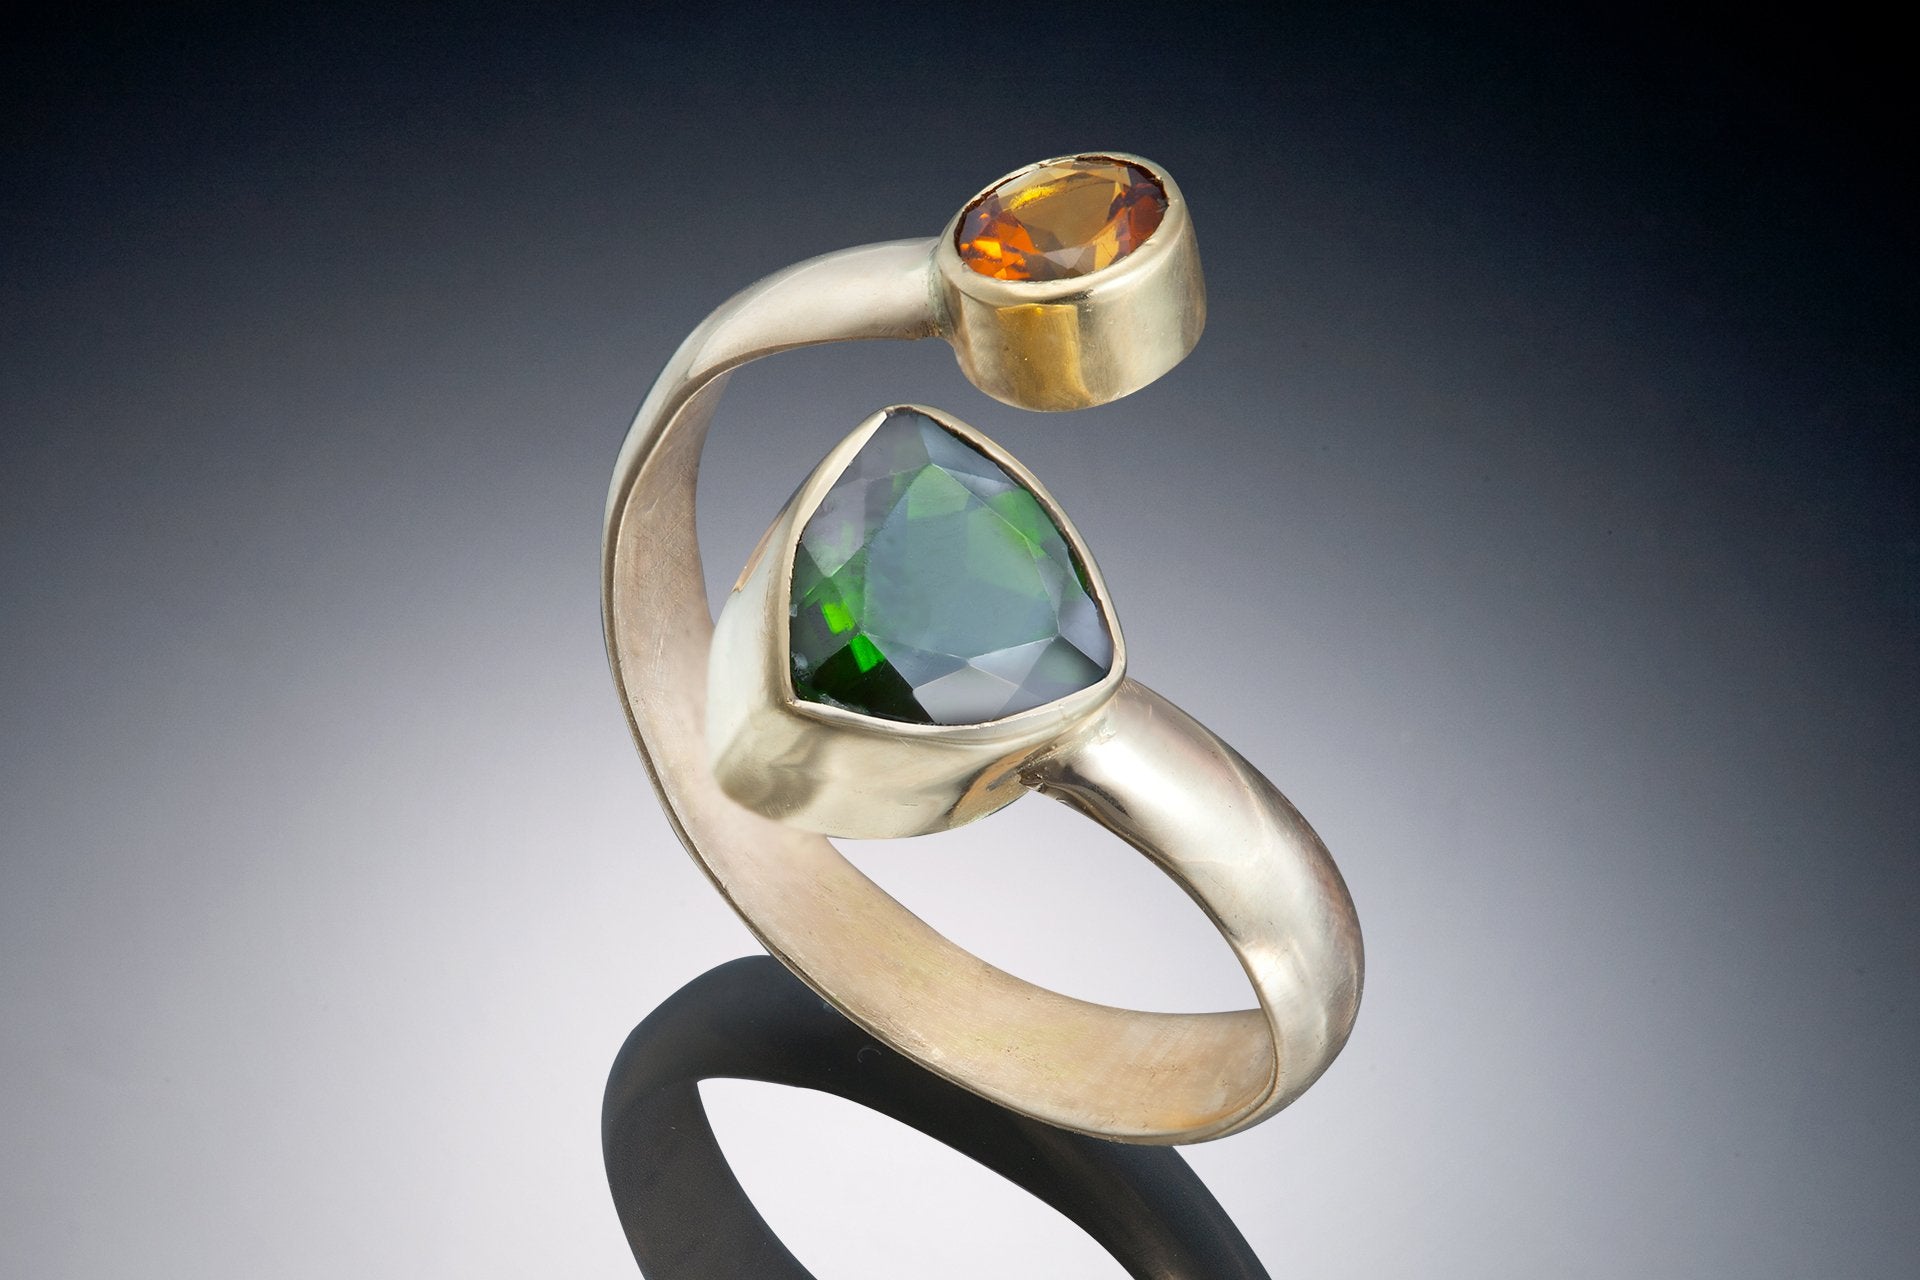 14k Rose,18k Yellow Gold Ring w Citrine/Chrome Diopside